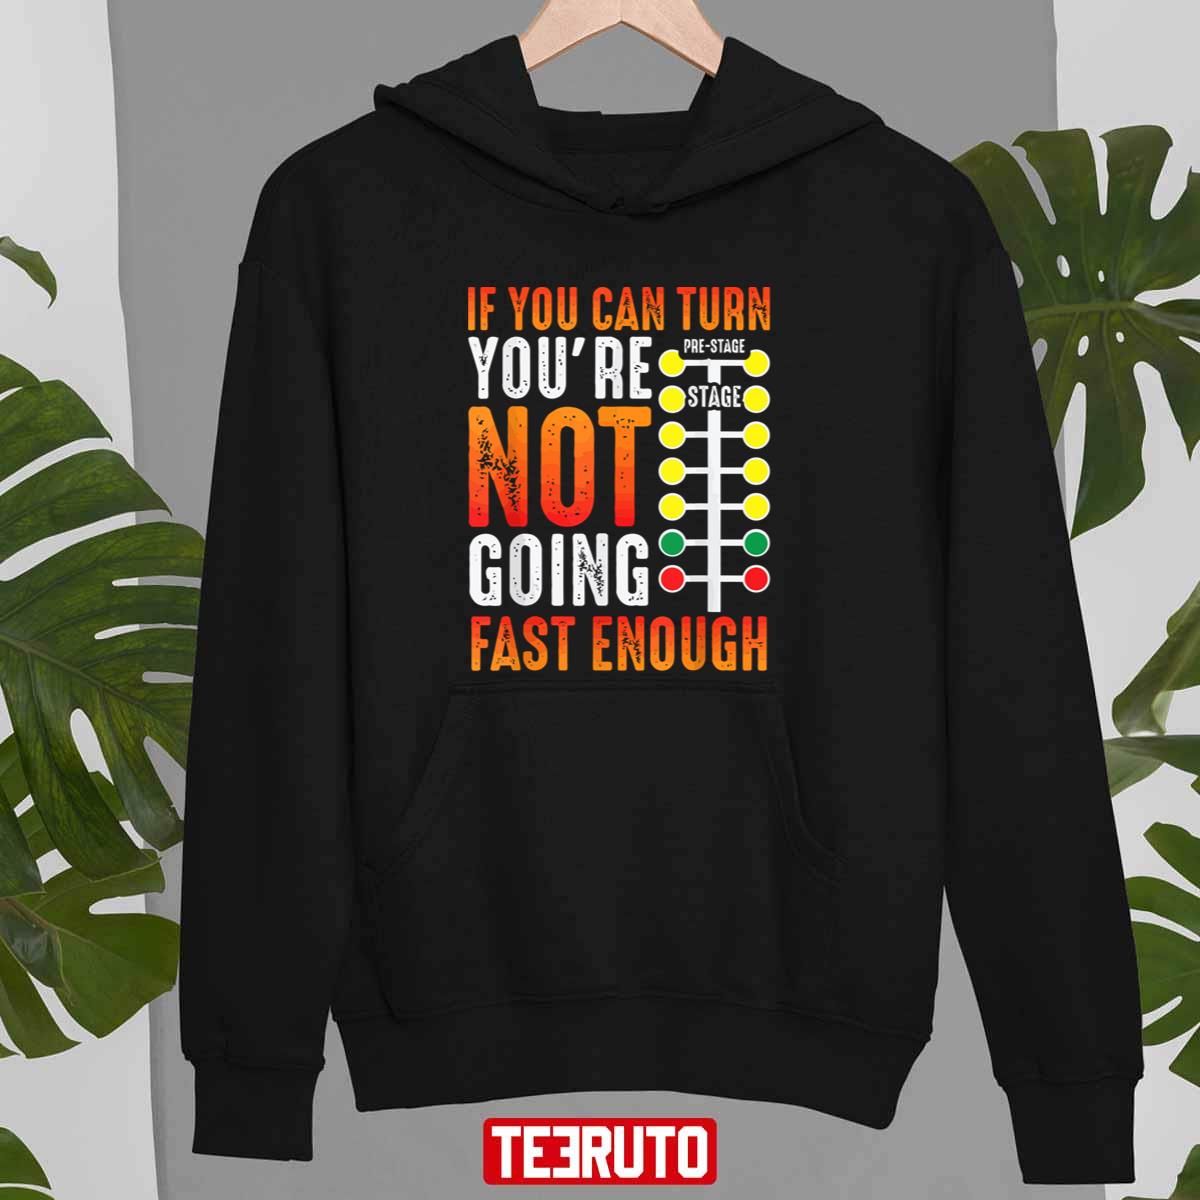 If You Can Turn You're Not Going Fast Enough Sprint Car Dirt Track Racing Christmas Unisex Sweatshirt